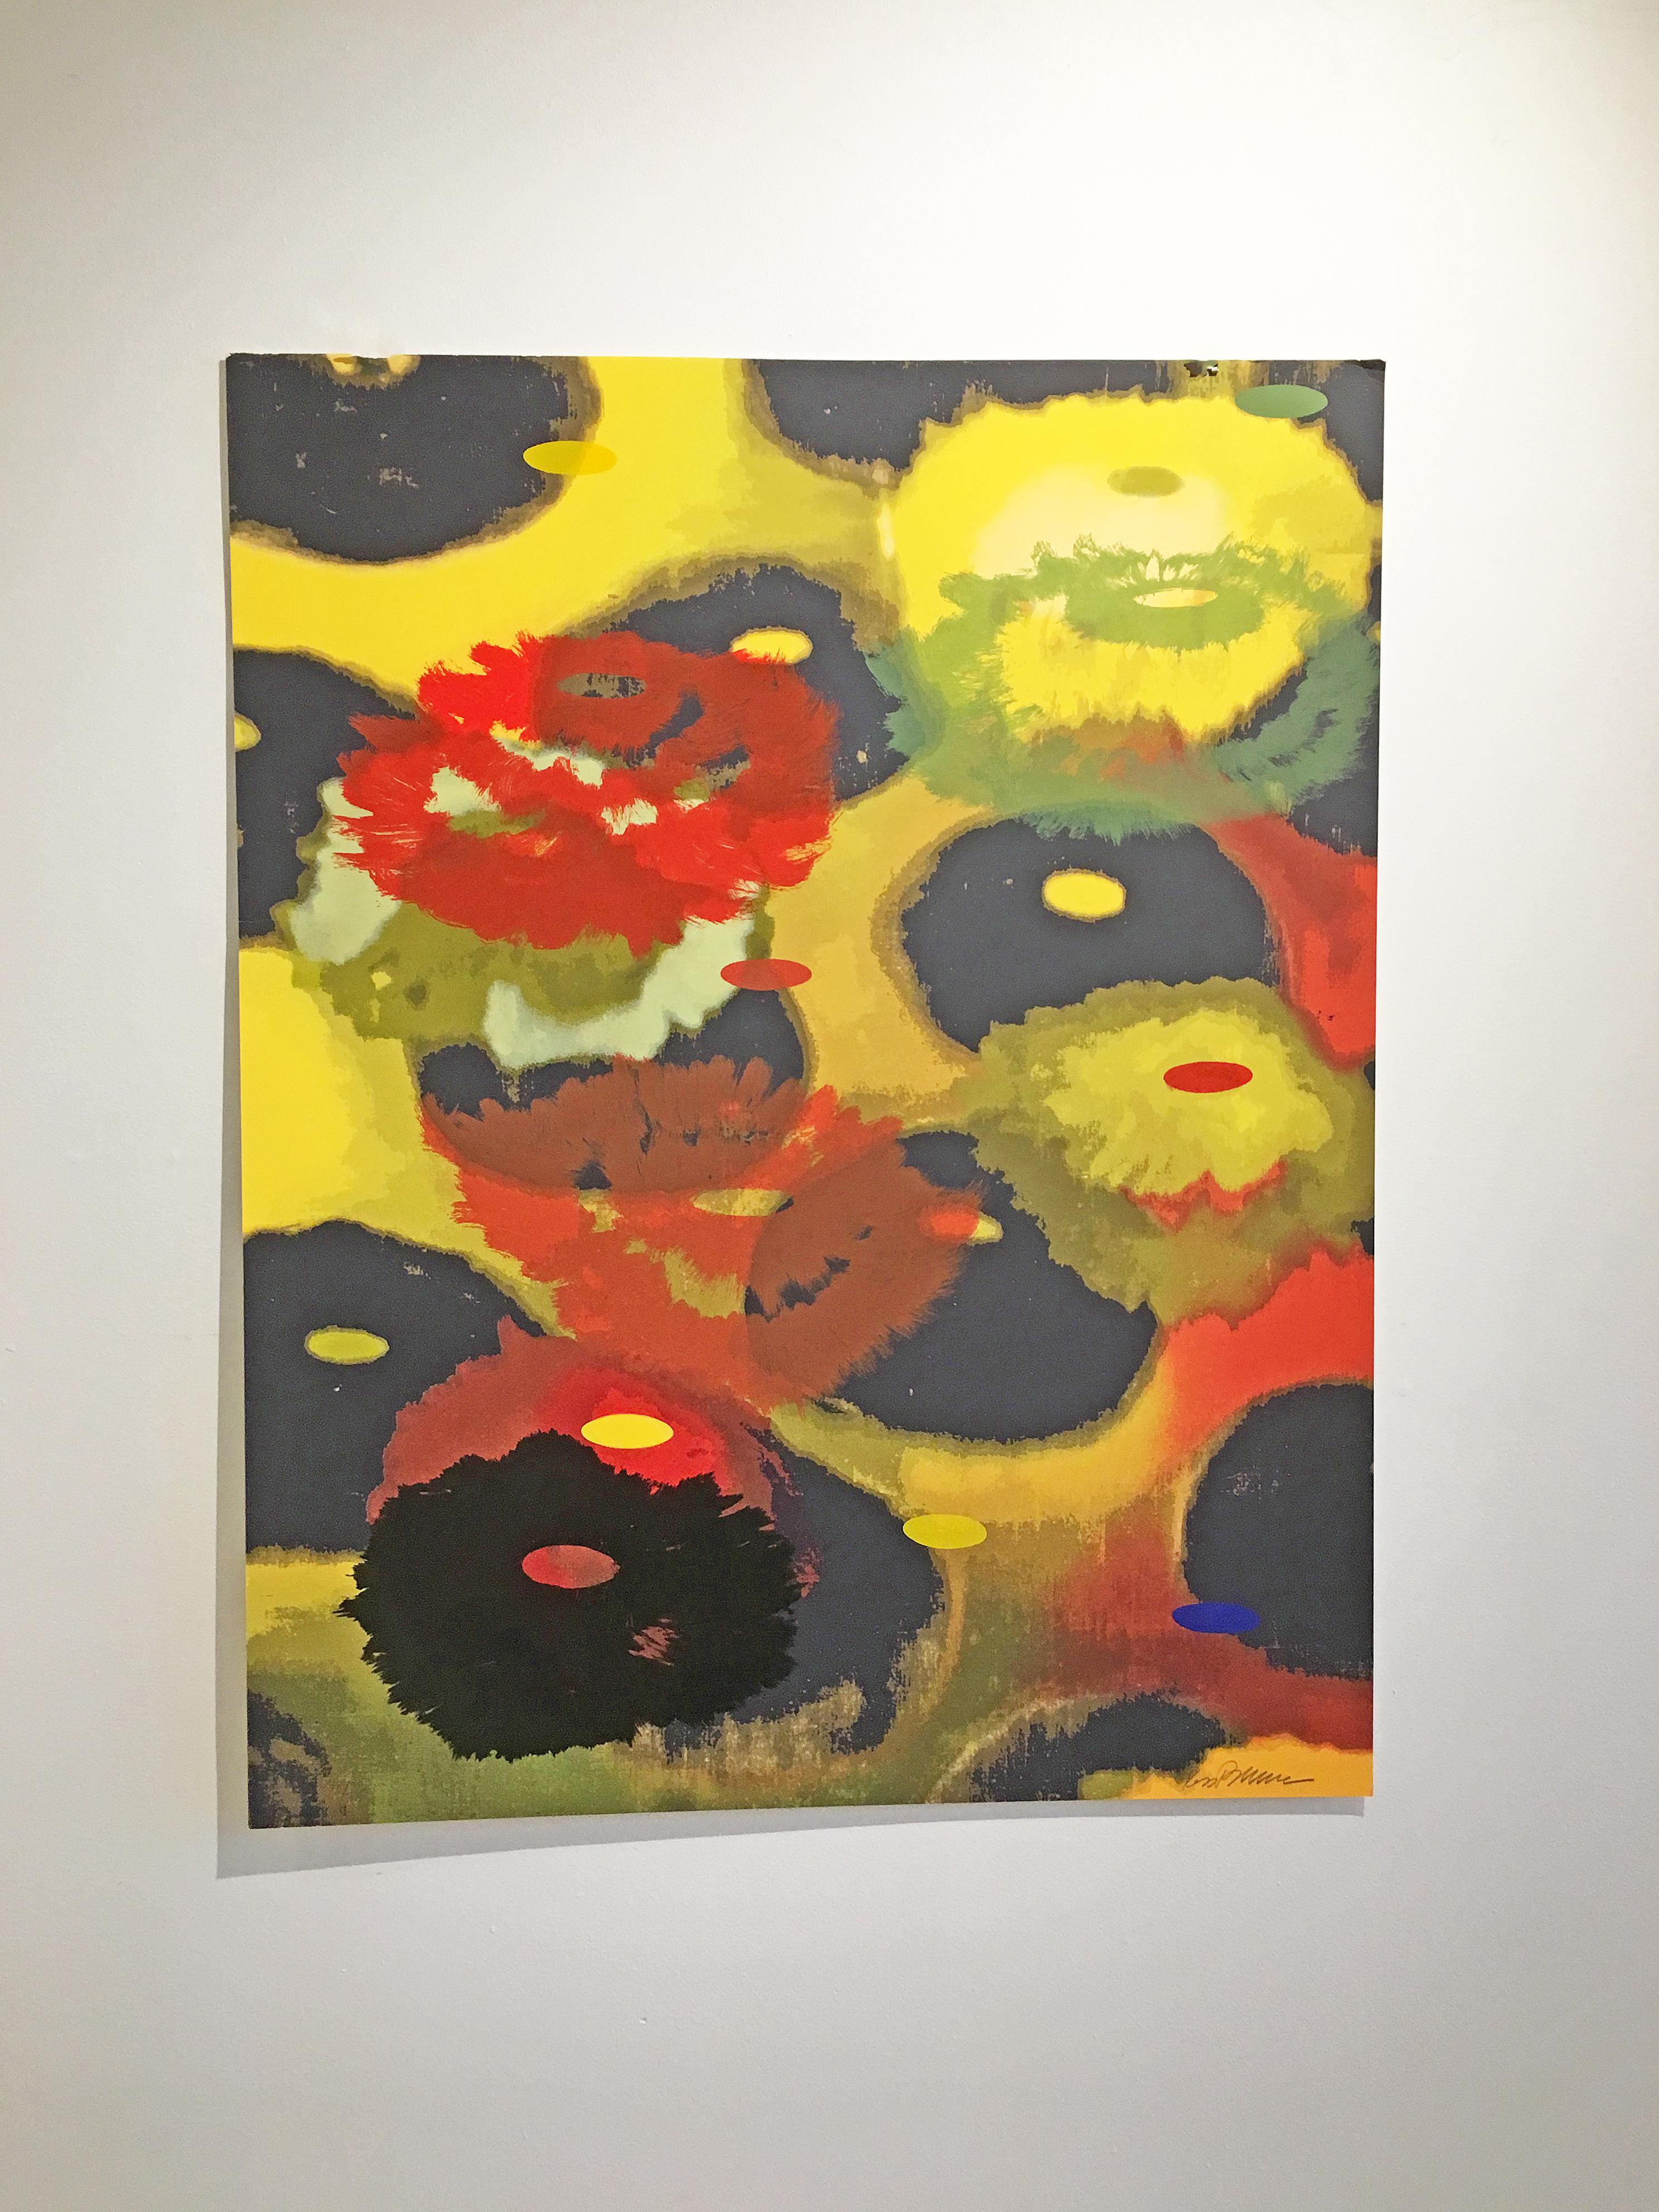 PSI (From the Suite of 3) - Print by Ross Bleckner